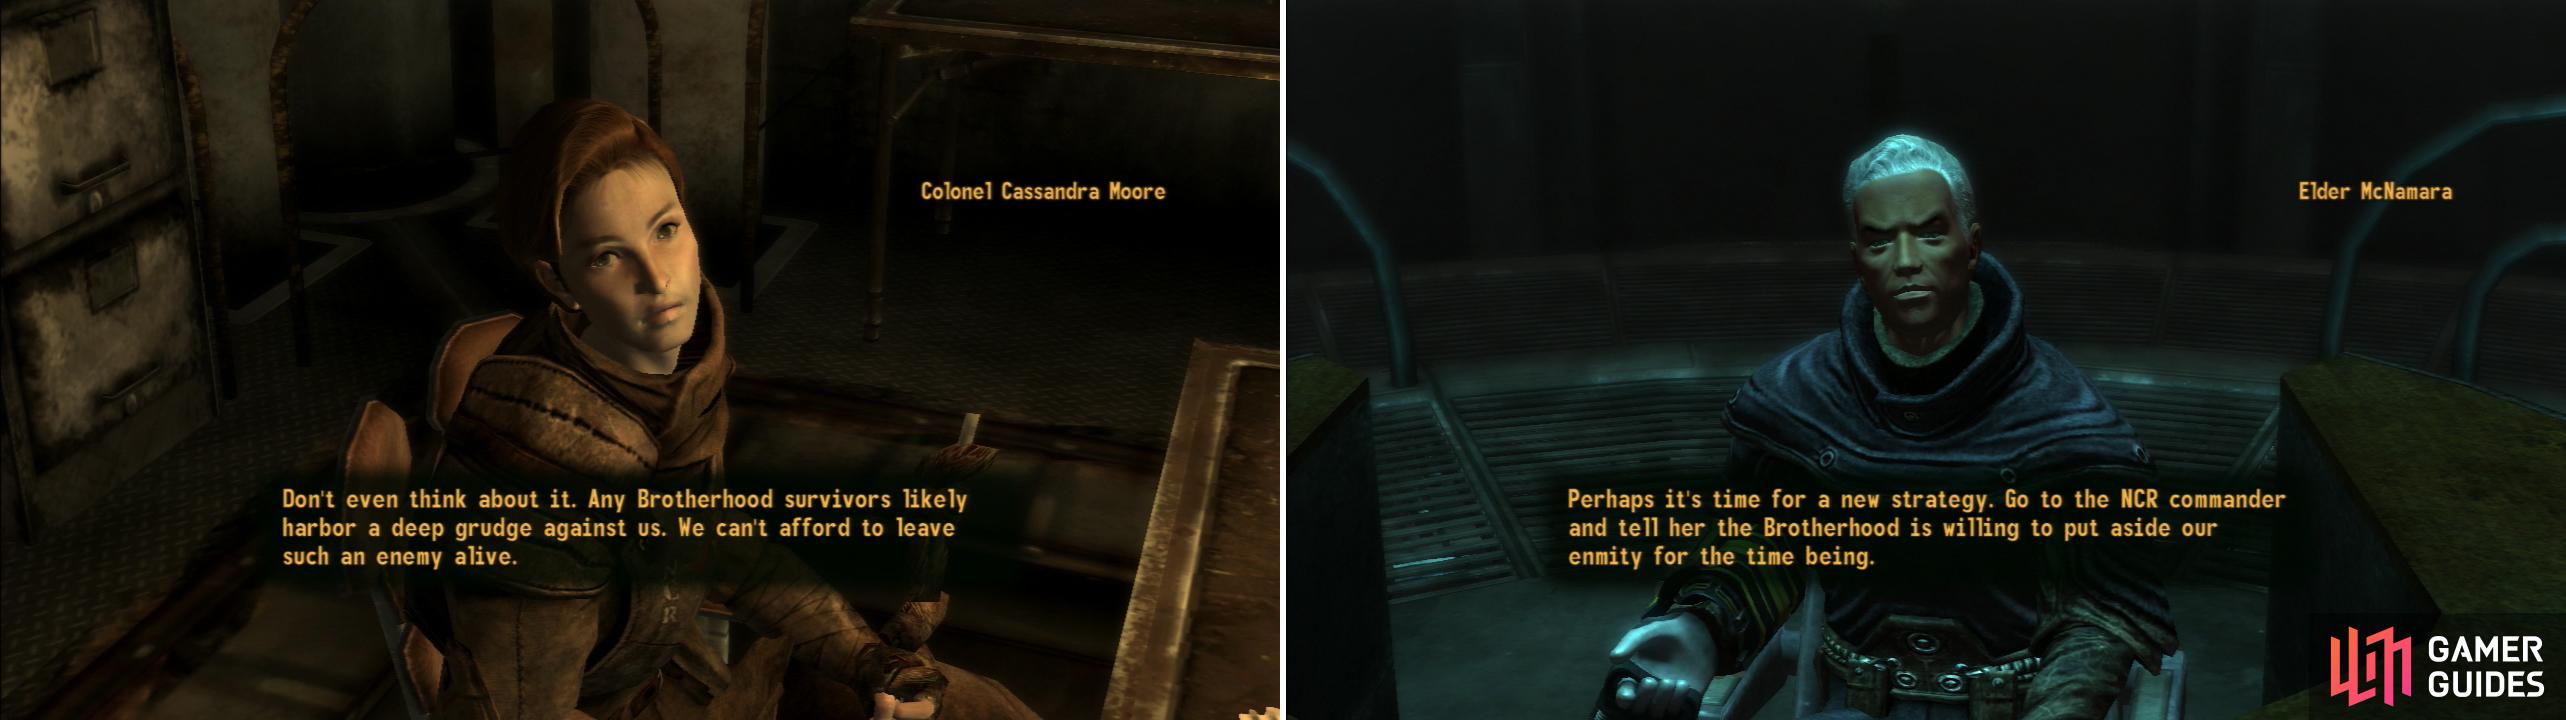 Colonel Cassandra Moore will pooh-pooh the idea of an NCR/Brotherhood alliance (left), but if you kept Elder McNamara in charge, such an outcome is easy enough to put into effect (right).